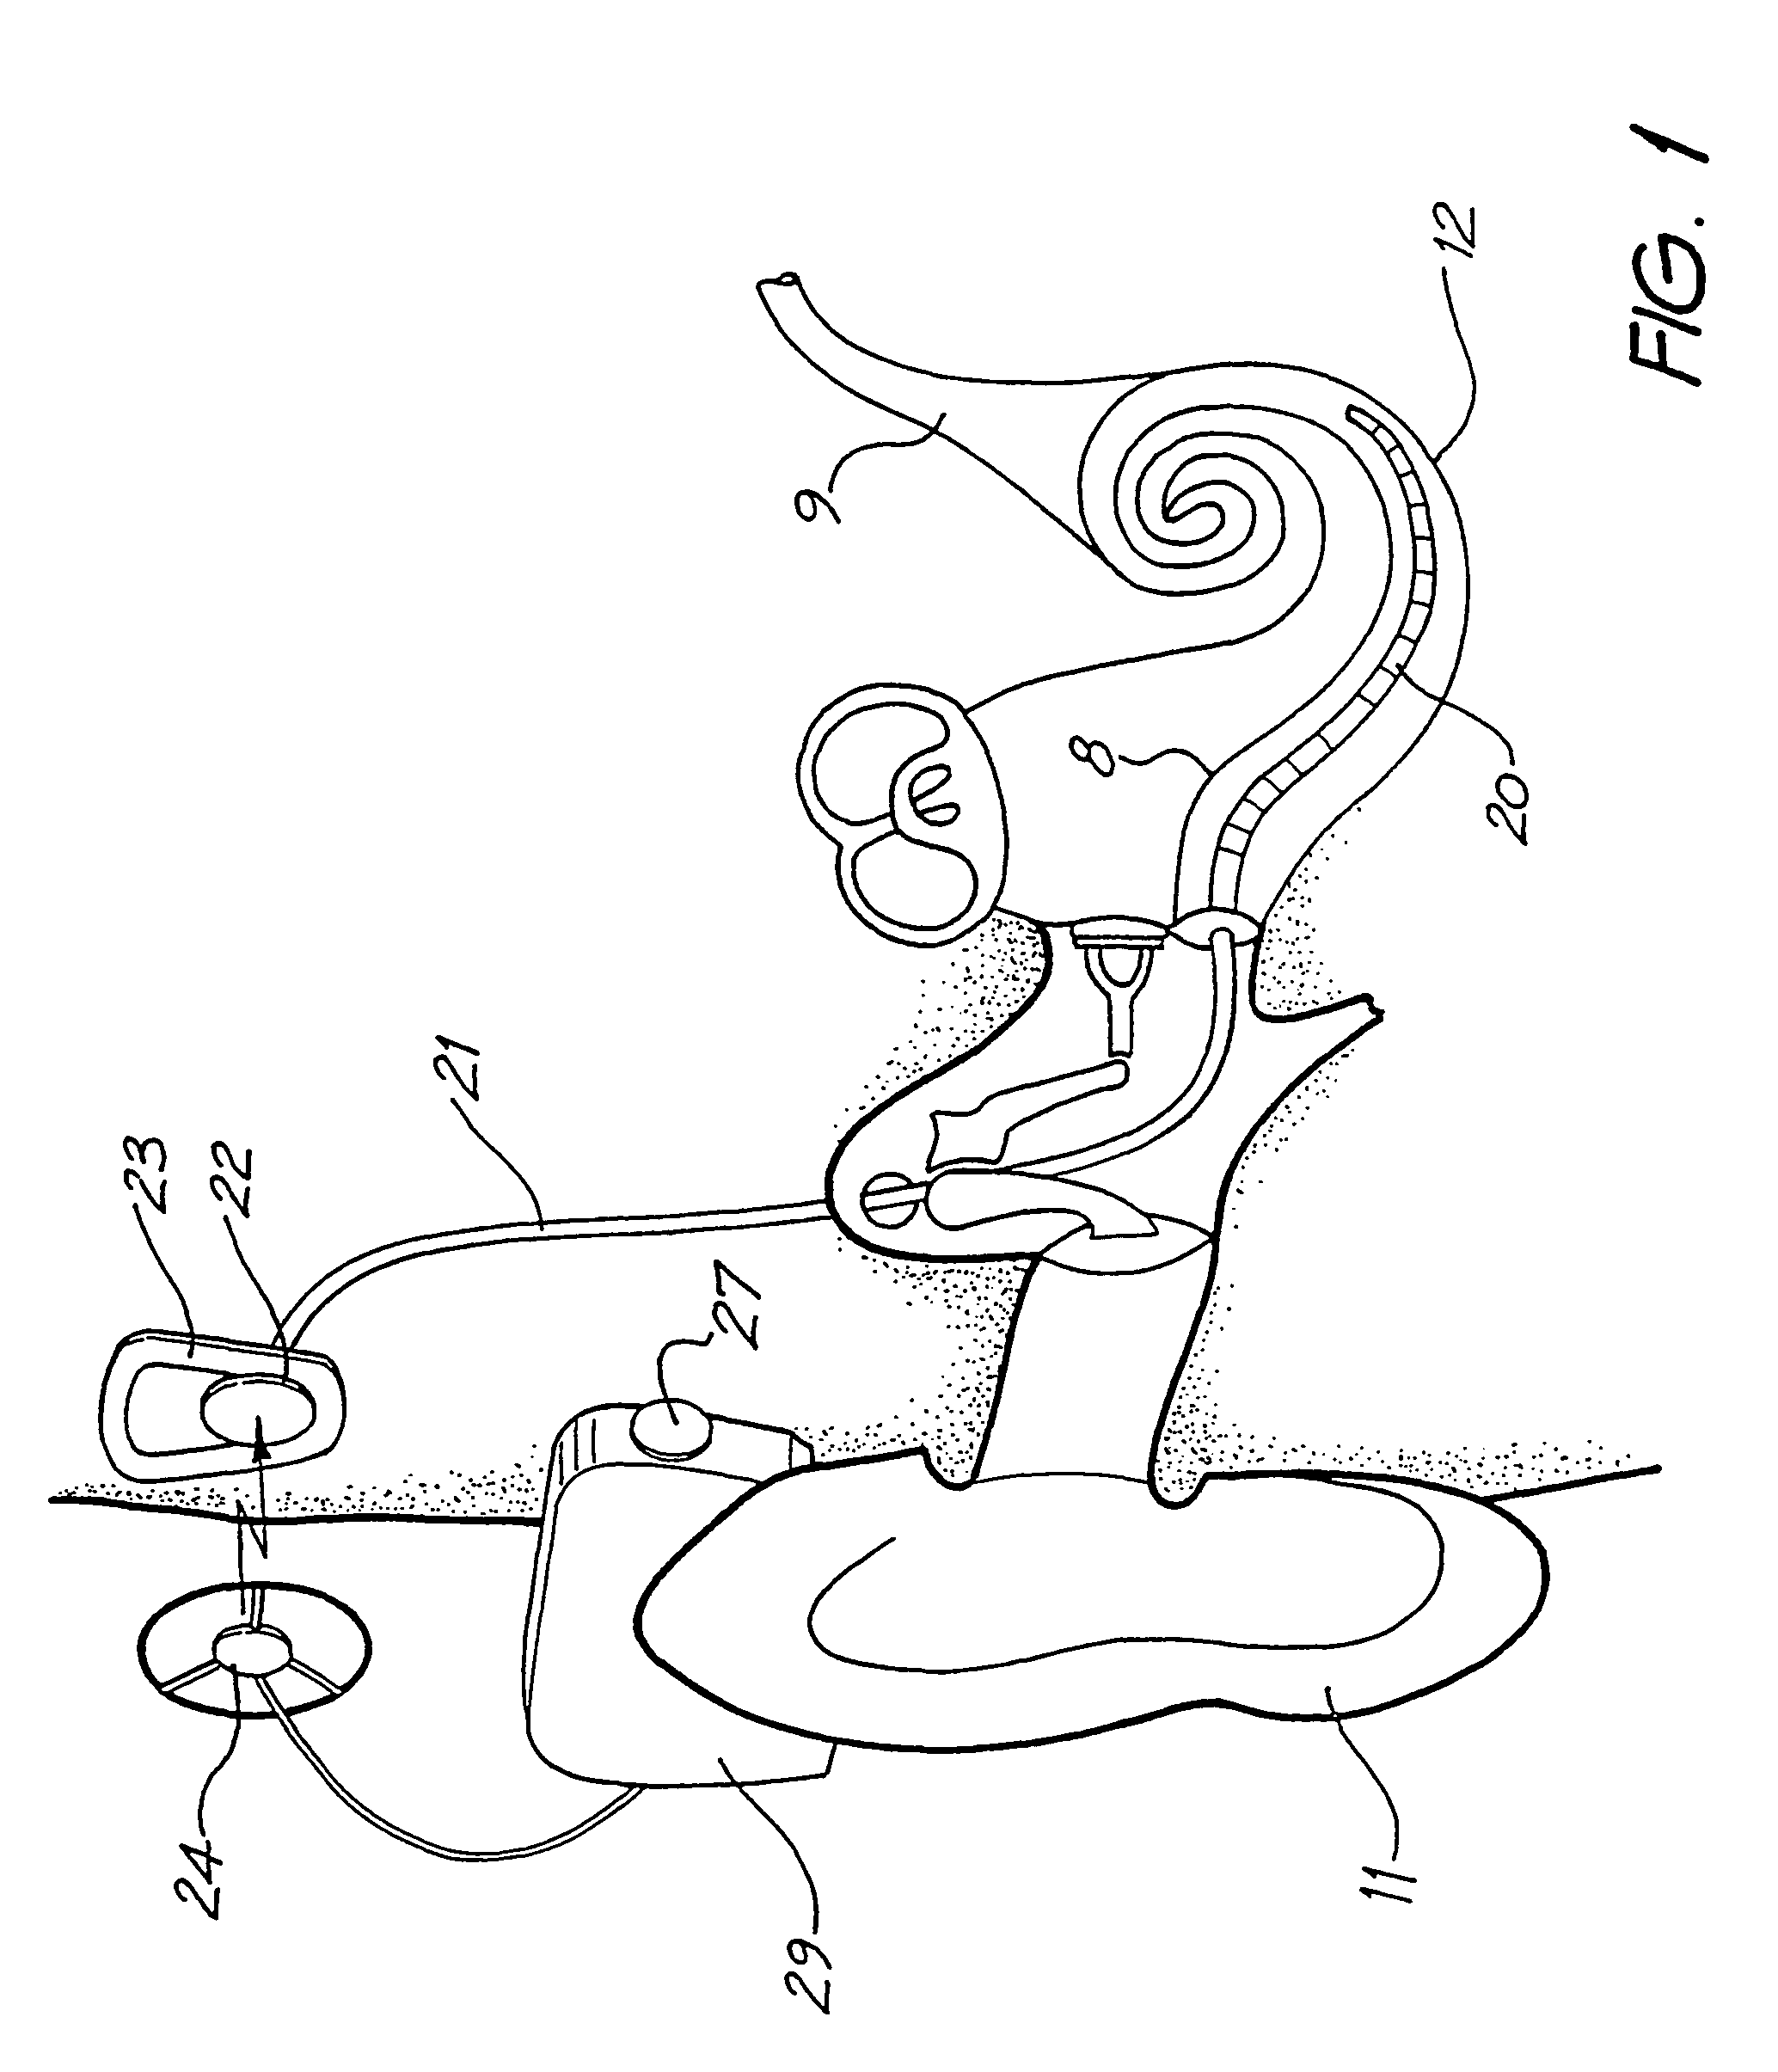 Variable sensitivity control for a cochlear implant